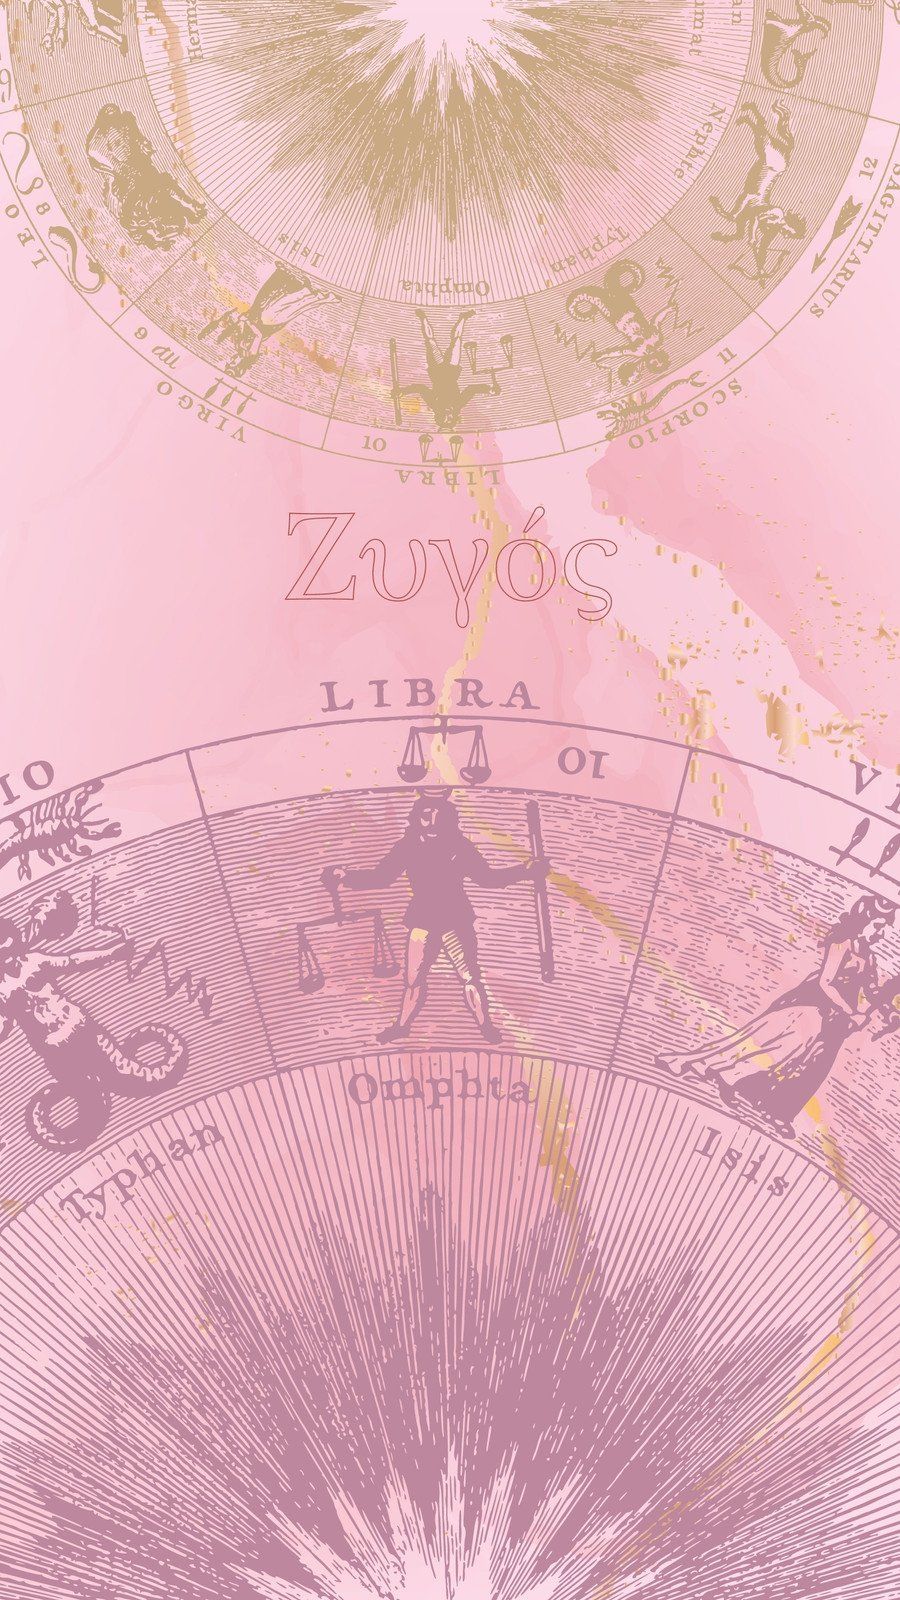 A calendar with the zodiac signs on it - Libra